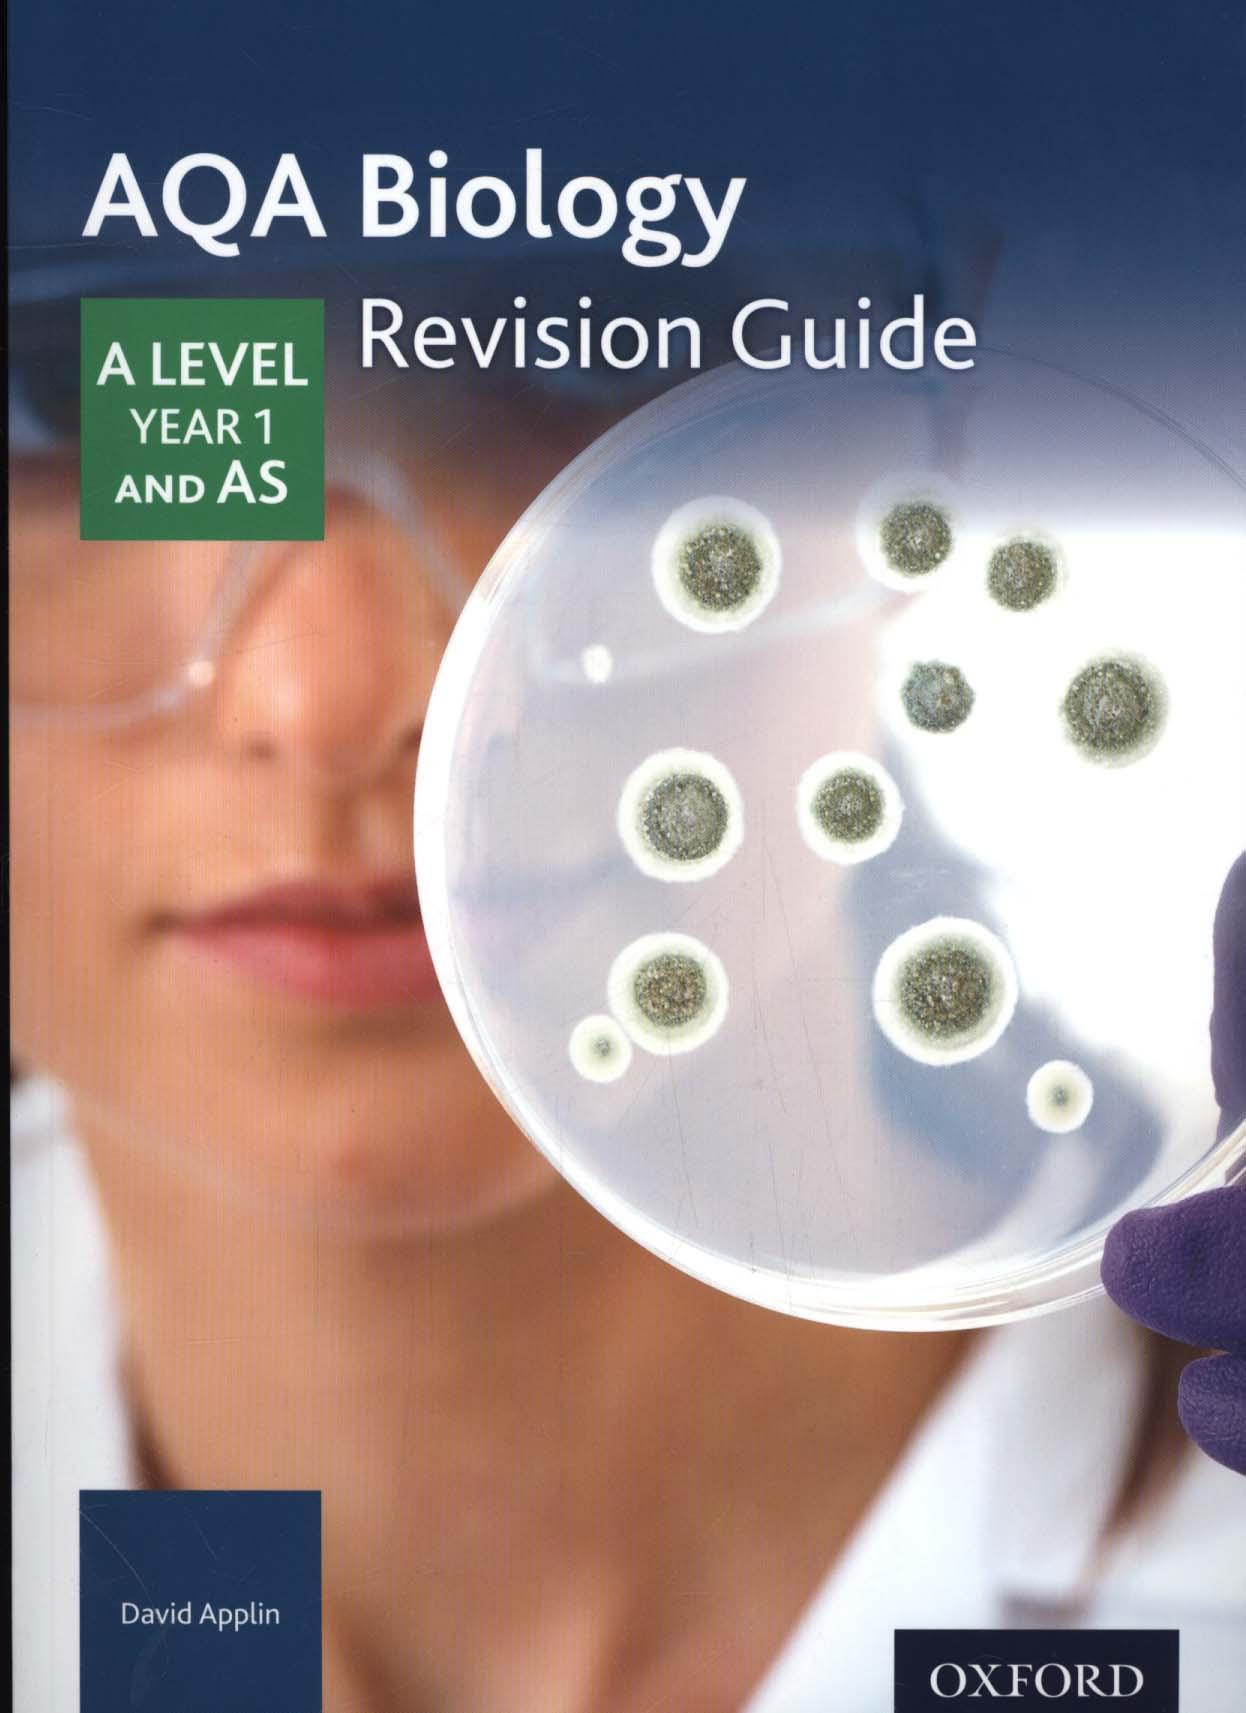 AQA A Level Biology Year 1 Revision Guide